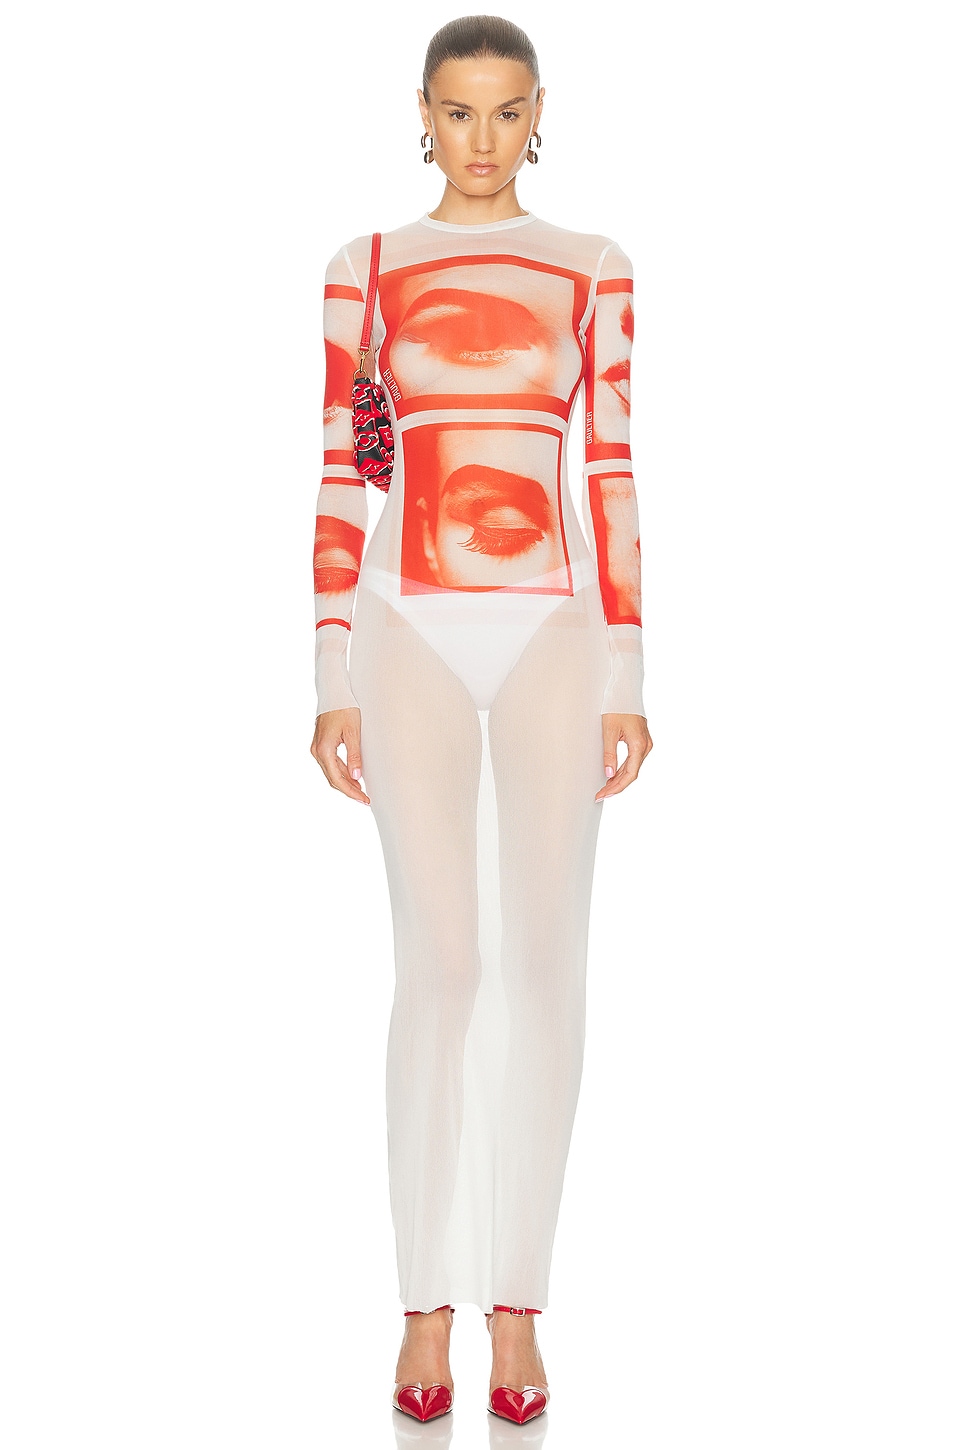 Image 1 of Jean Paul Gaultier Eyes And Lips Mesh Long Printed Dress in White, Red, & Light Orange